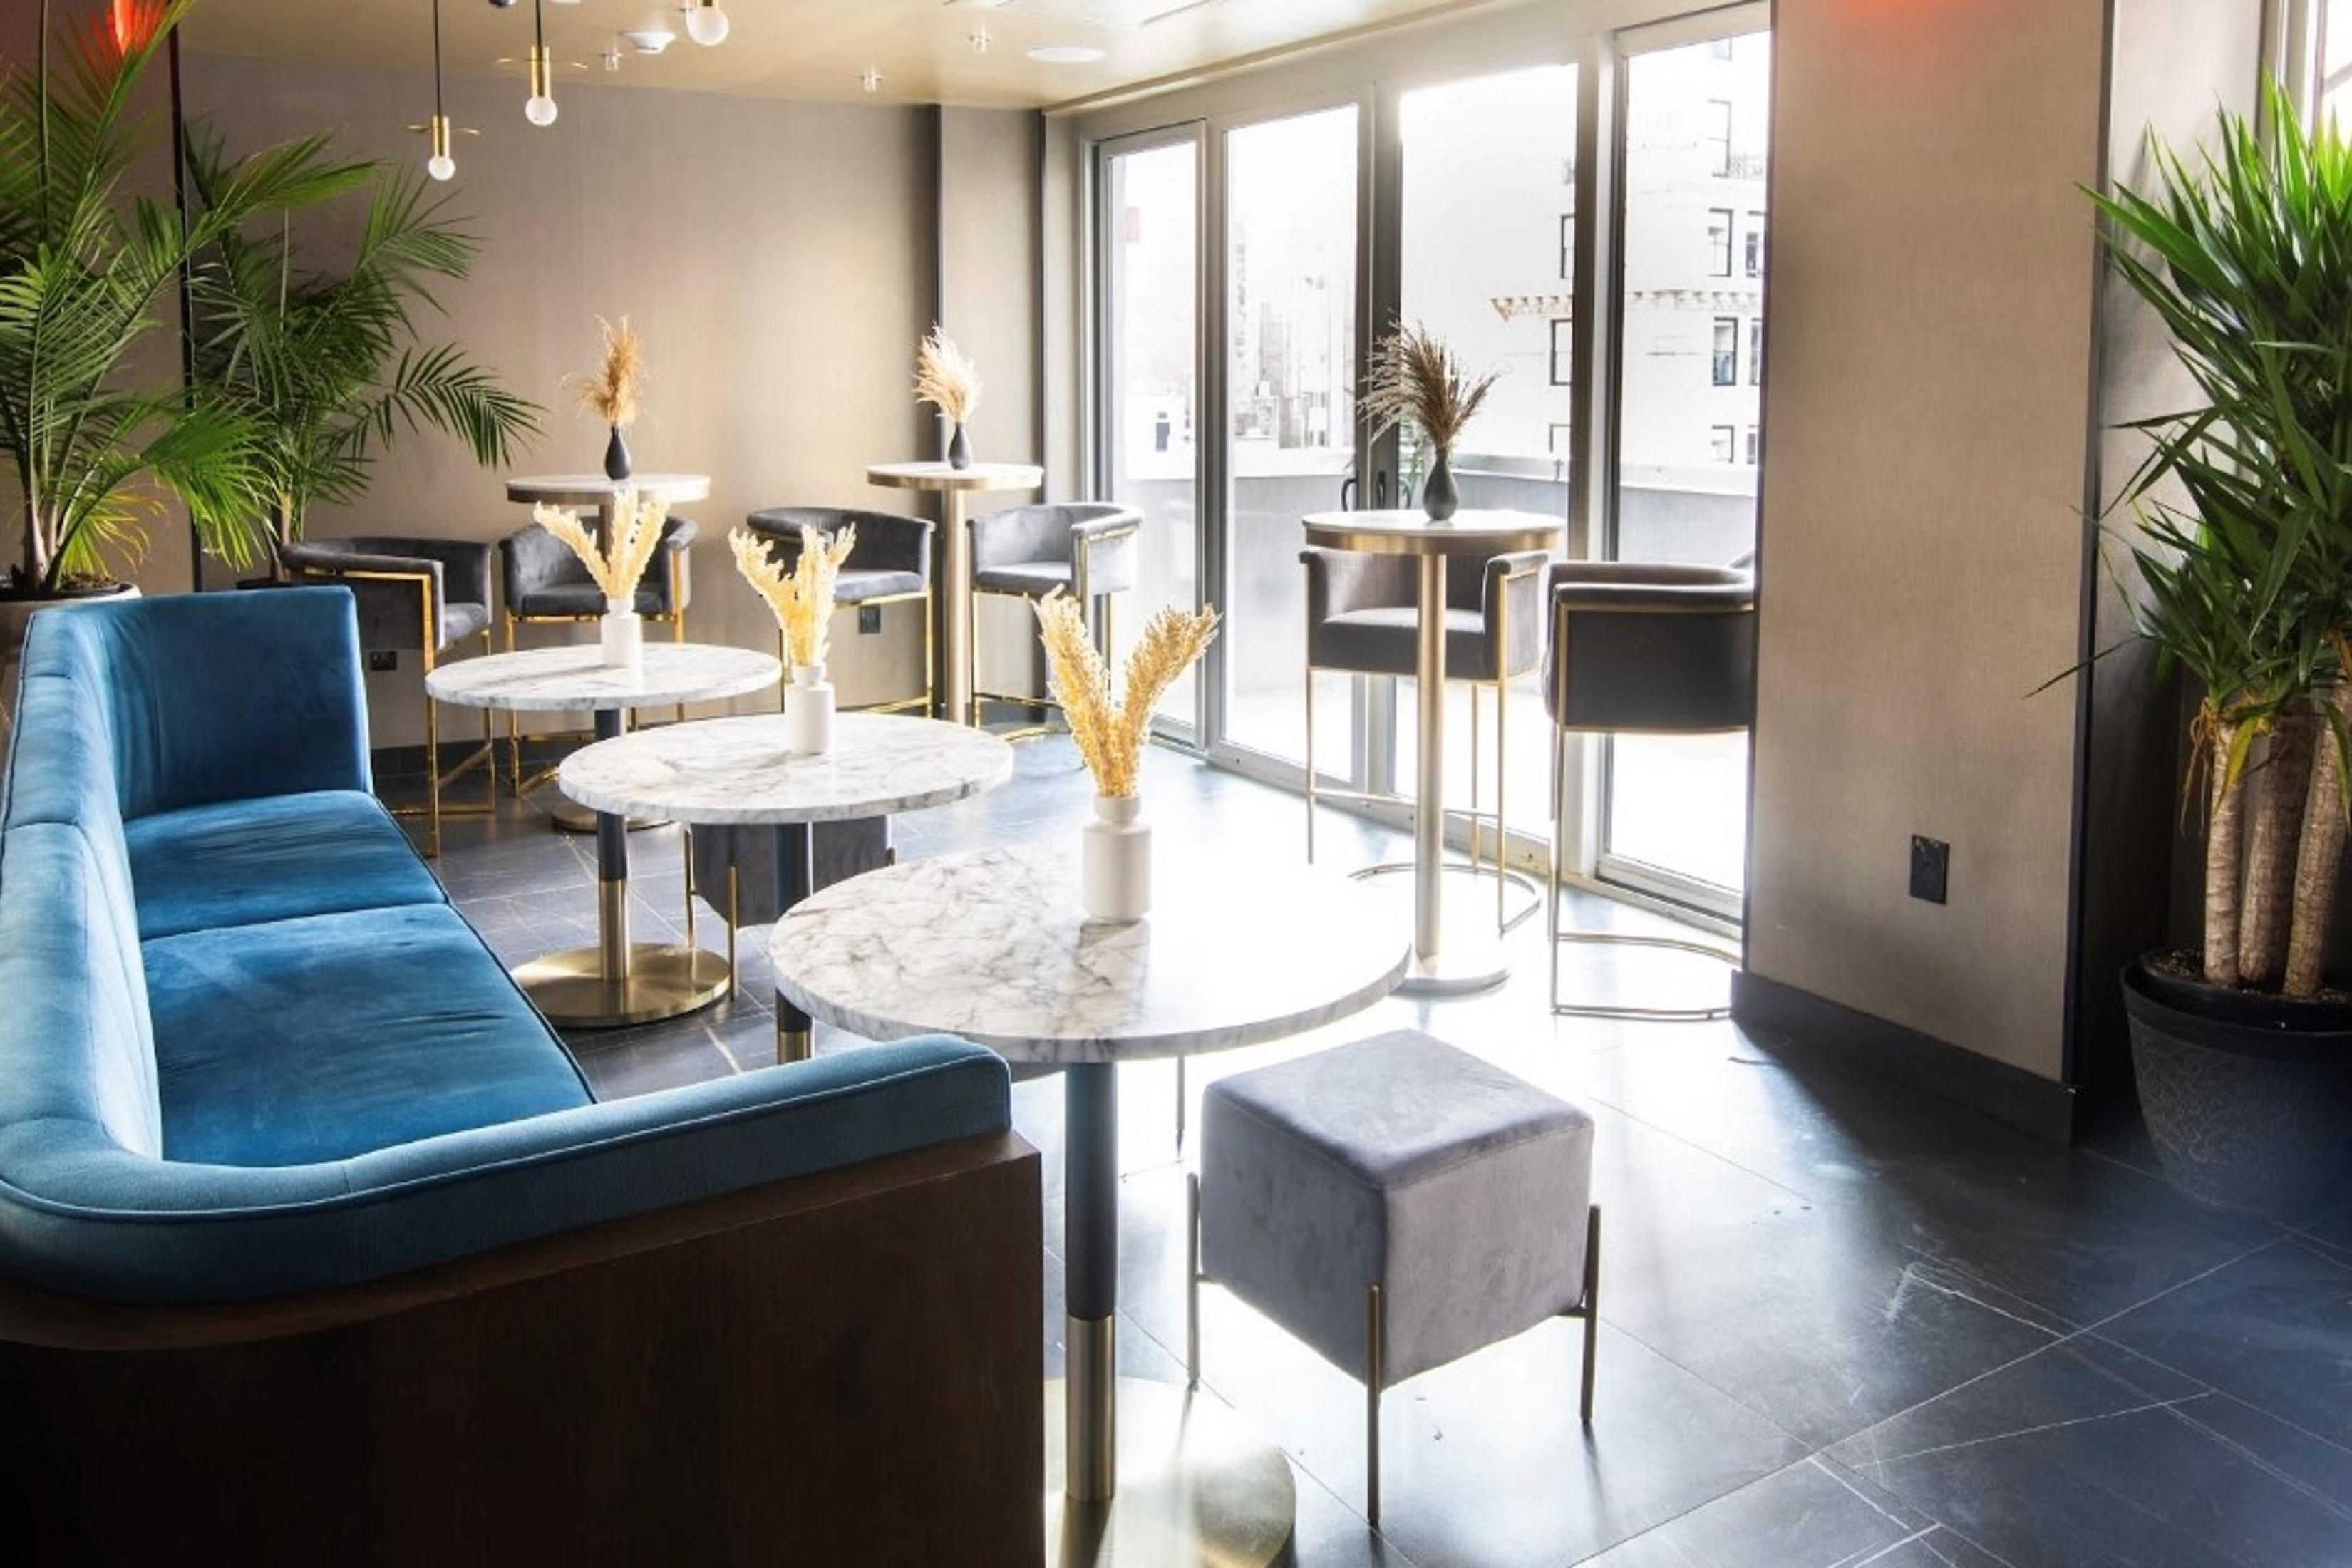 Enjoy a delicious breakfast and coffee in the casual ambiance of Buttonwood Café. Pop up to the Highwater Rooftop Bar with views of the breathtaking architecture of the Financial District and Lower Manhattan. 